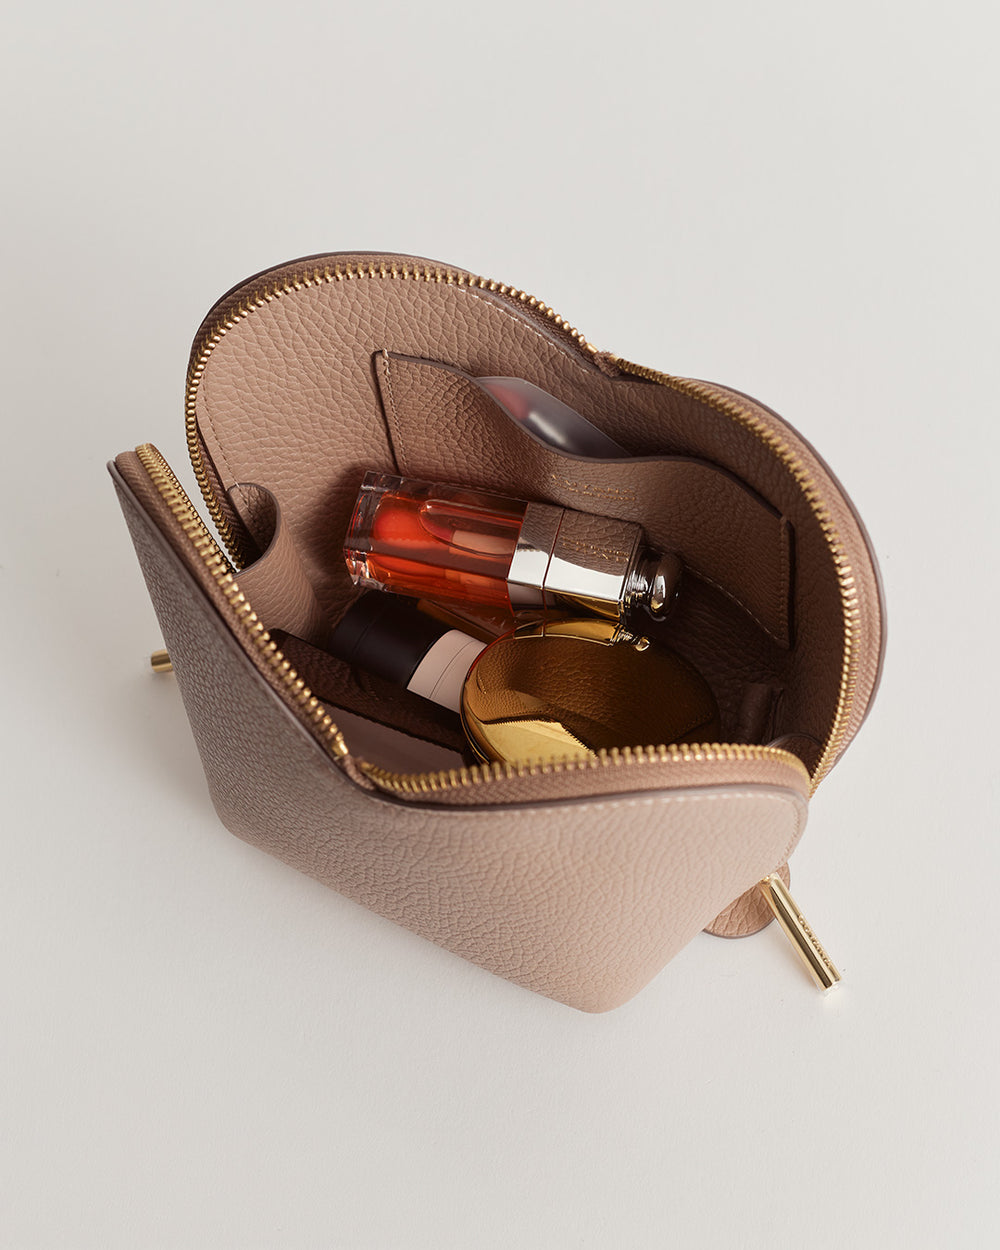 Open cosmetic bag with various beauty products inside.